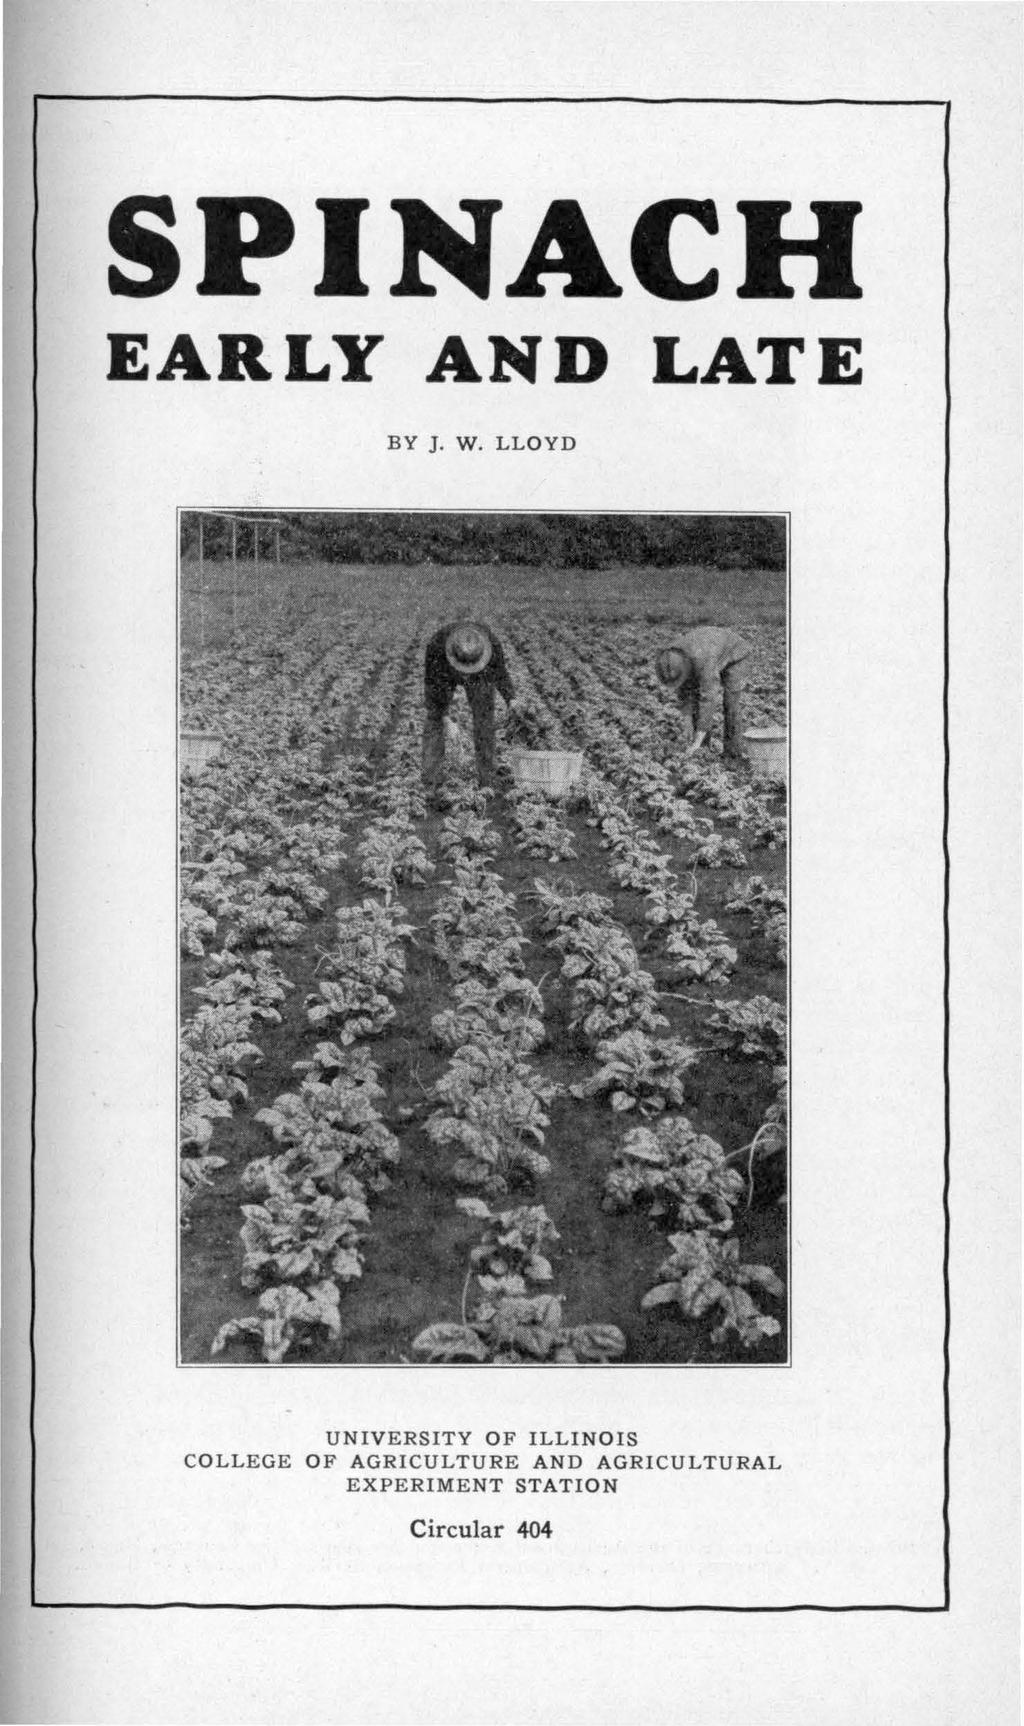 SPINACH EARLY AND LATE BY J. W.